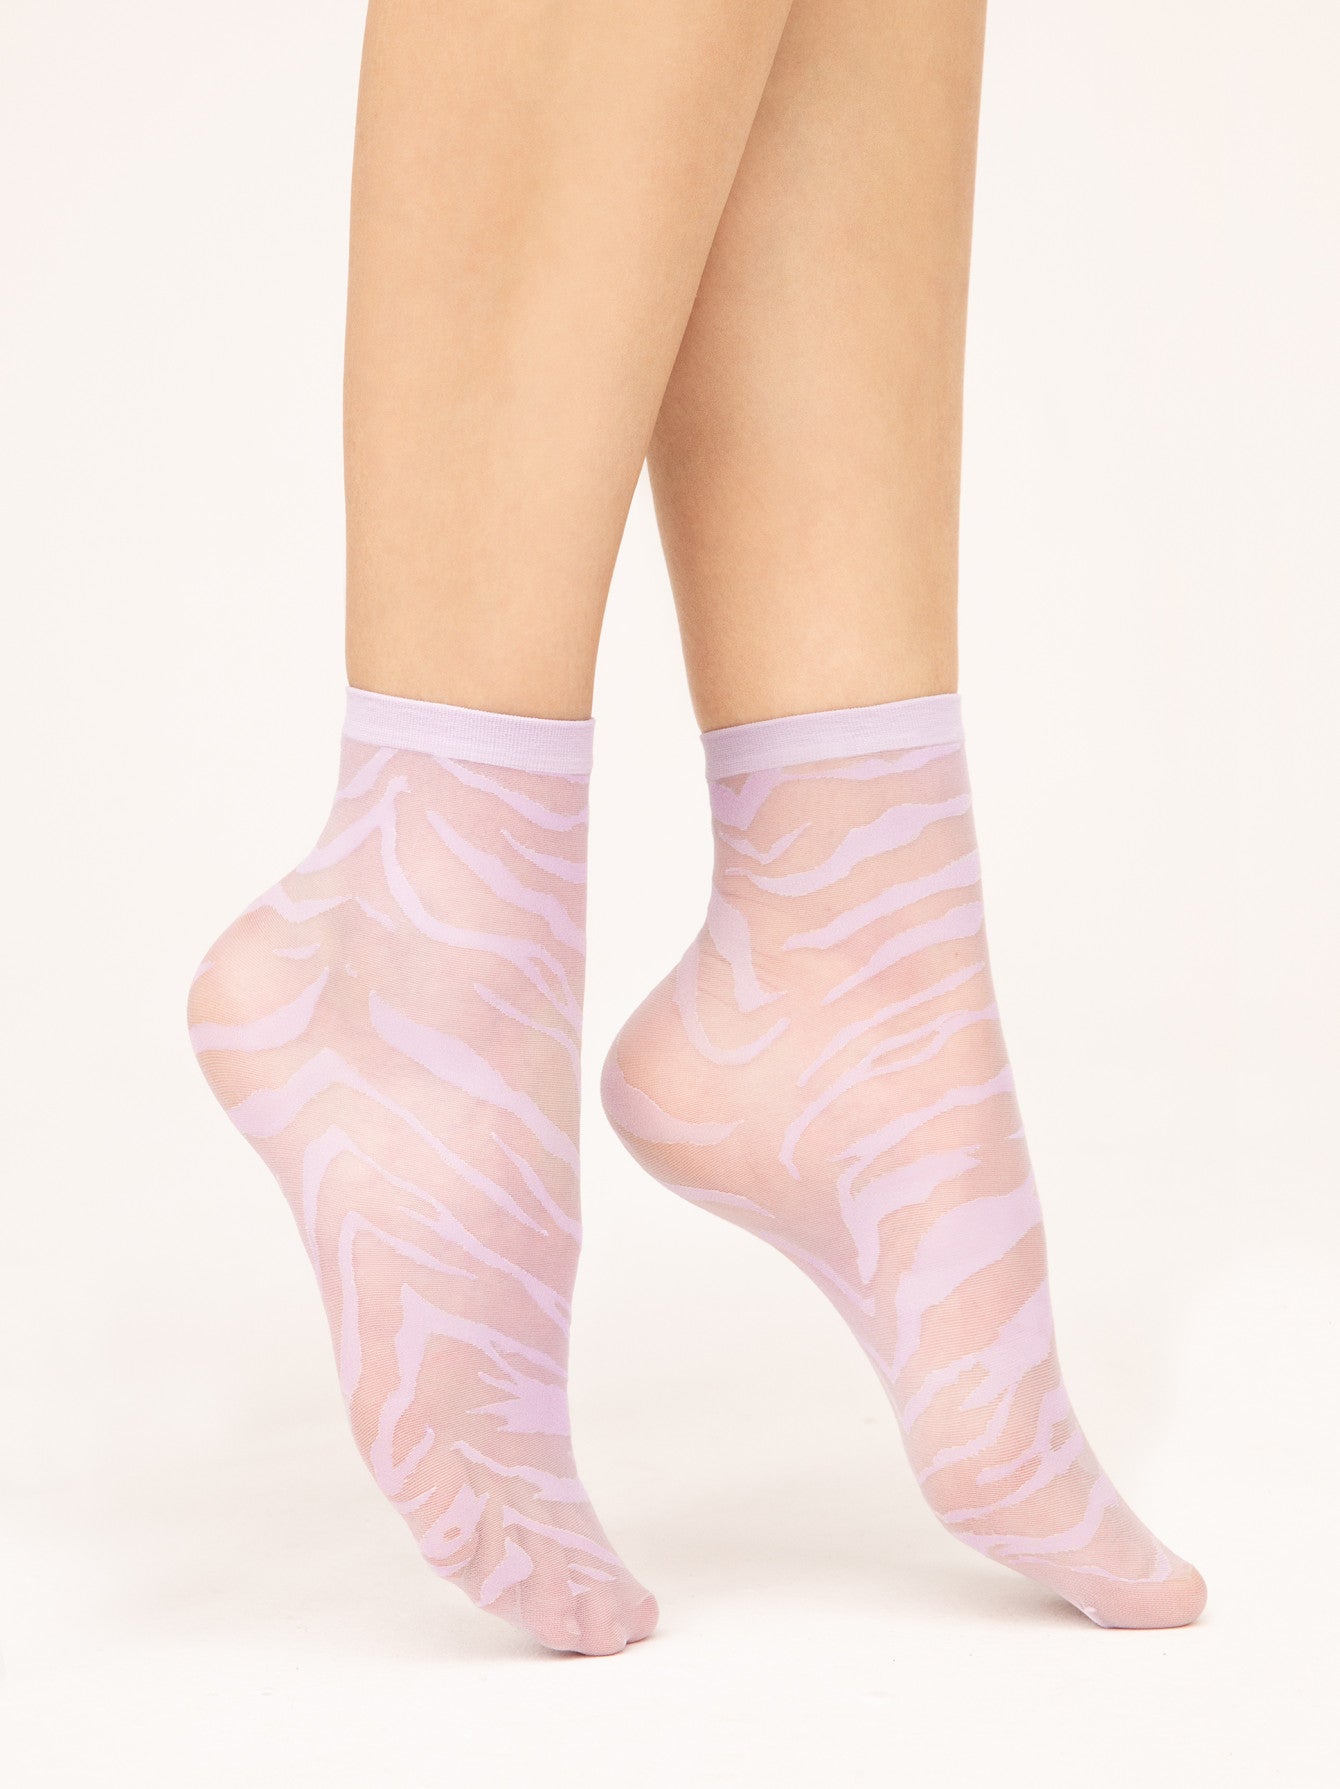 Fiore Steppe Socks - Sheer lilac fashion ankle socks with a woven zebra style pattern and plain thin cuff.